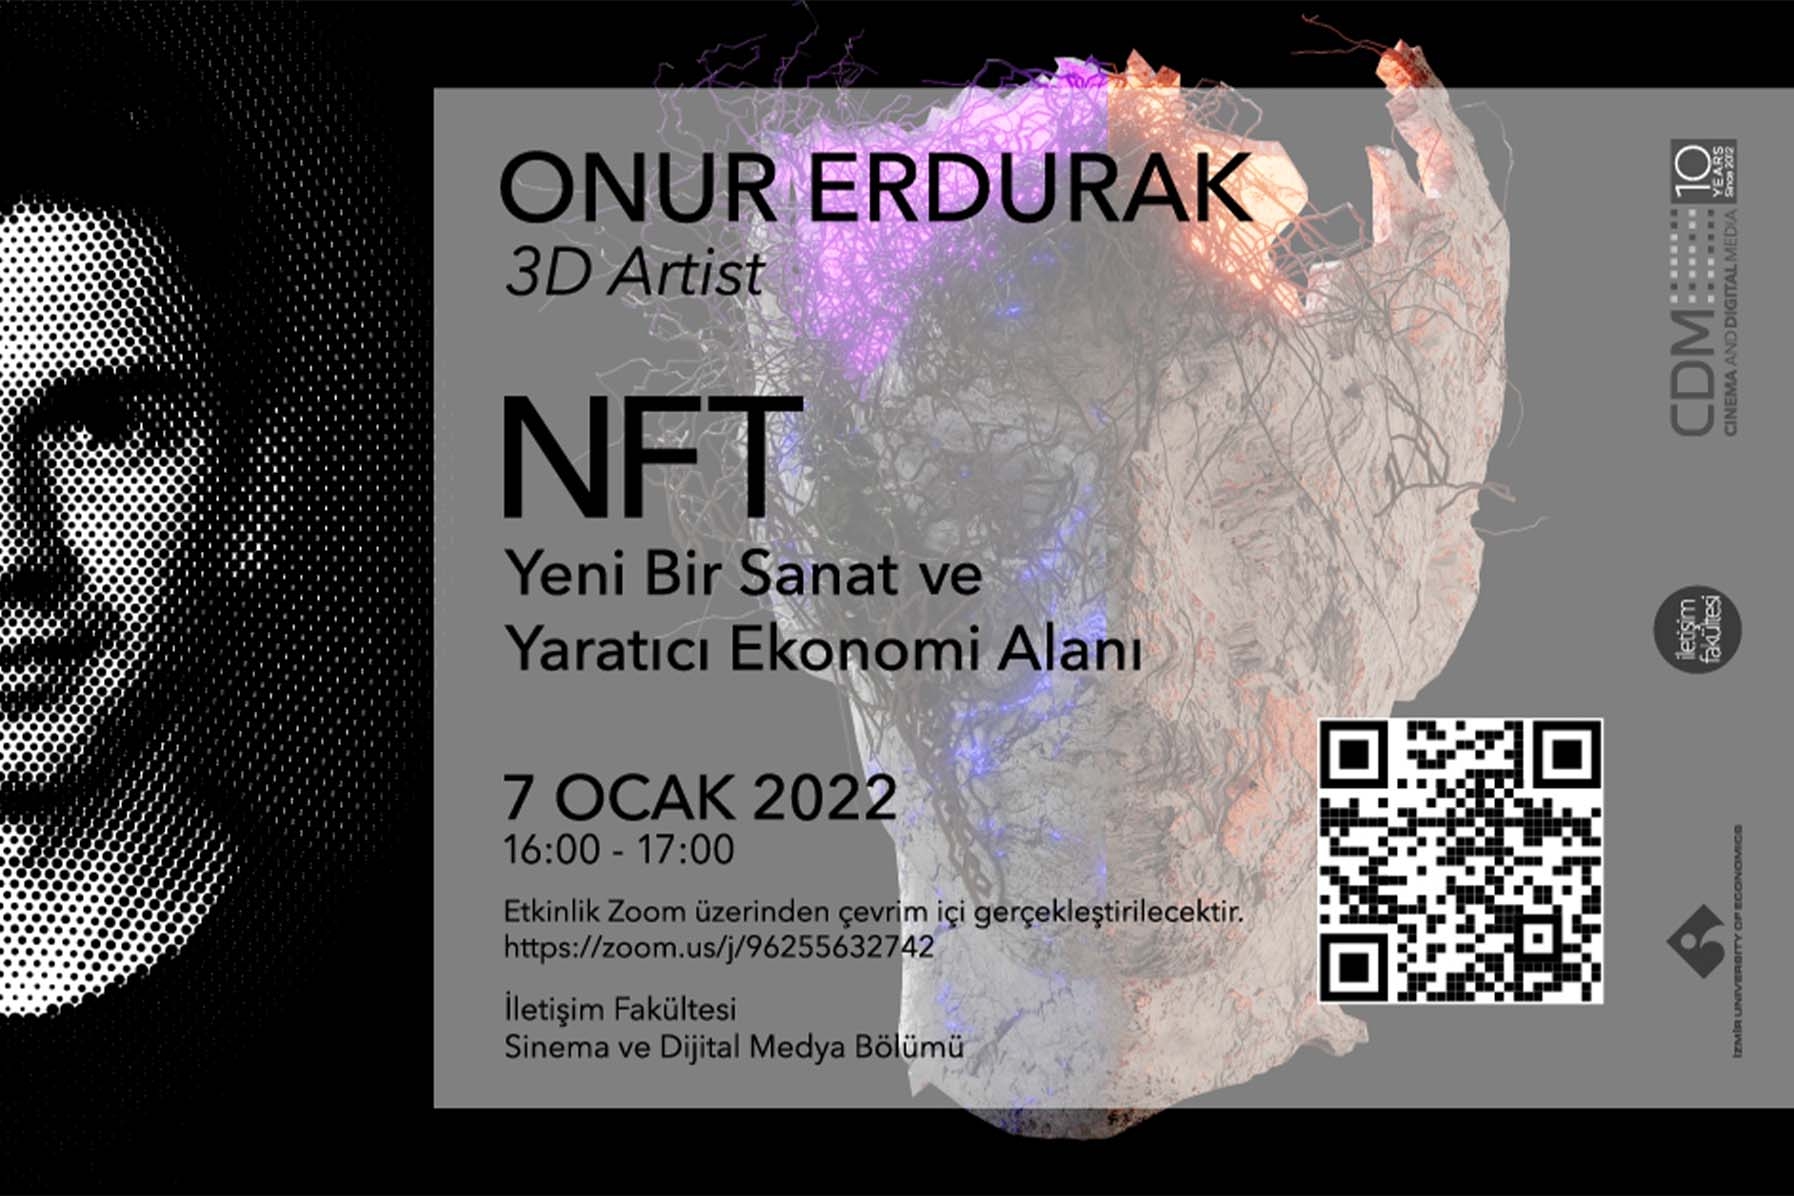 Department of Cinema and Digital Media Talks: "NFT: A New Artistic and Creative Economy Field"